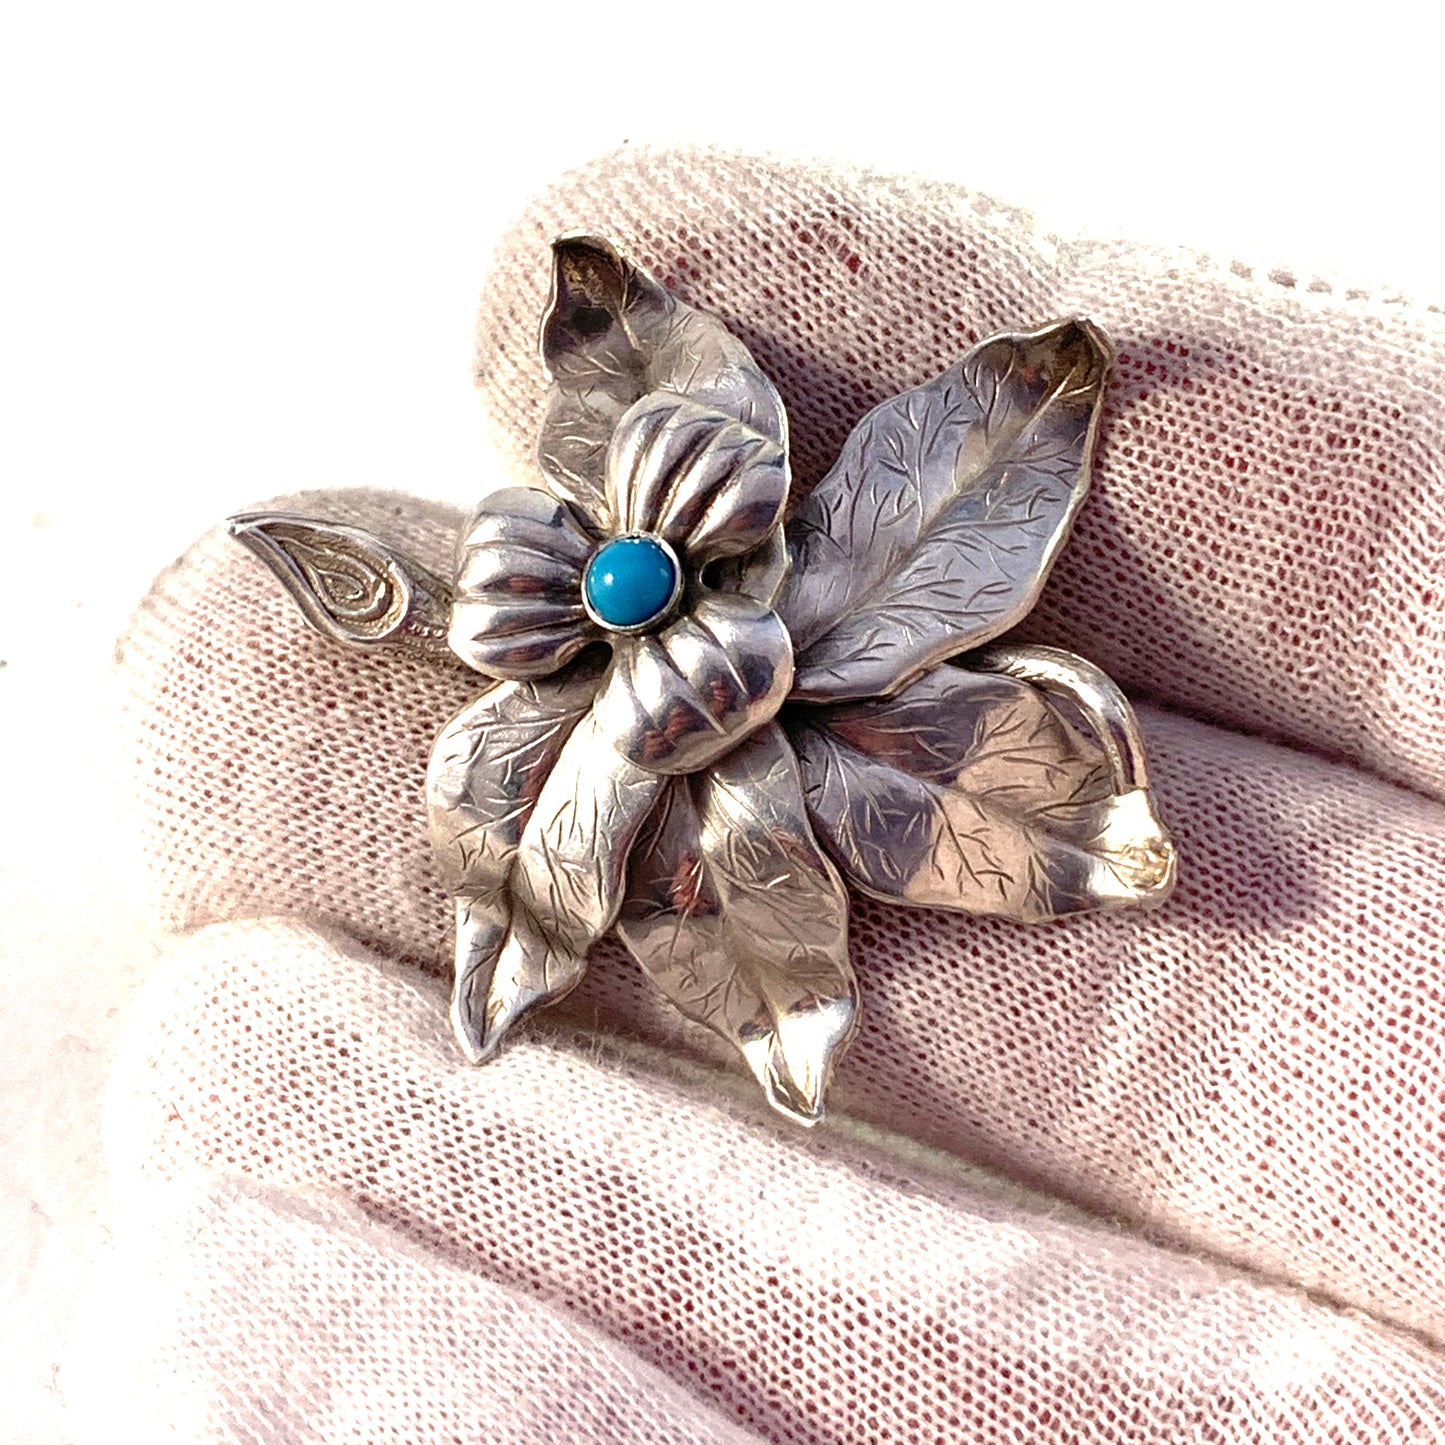 Pinco, Stockholm year 1953 Mid Century Solid Silver Turquoise Brooch.